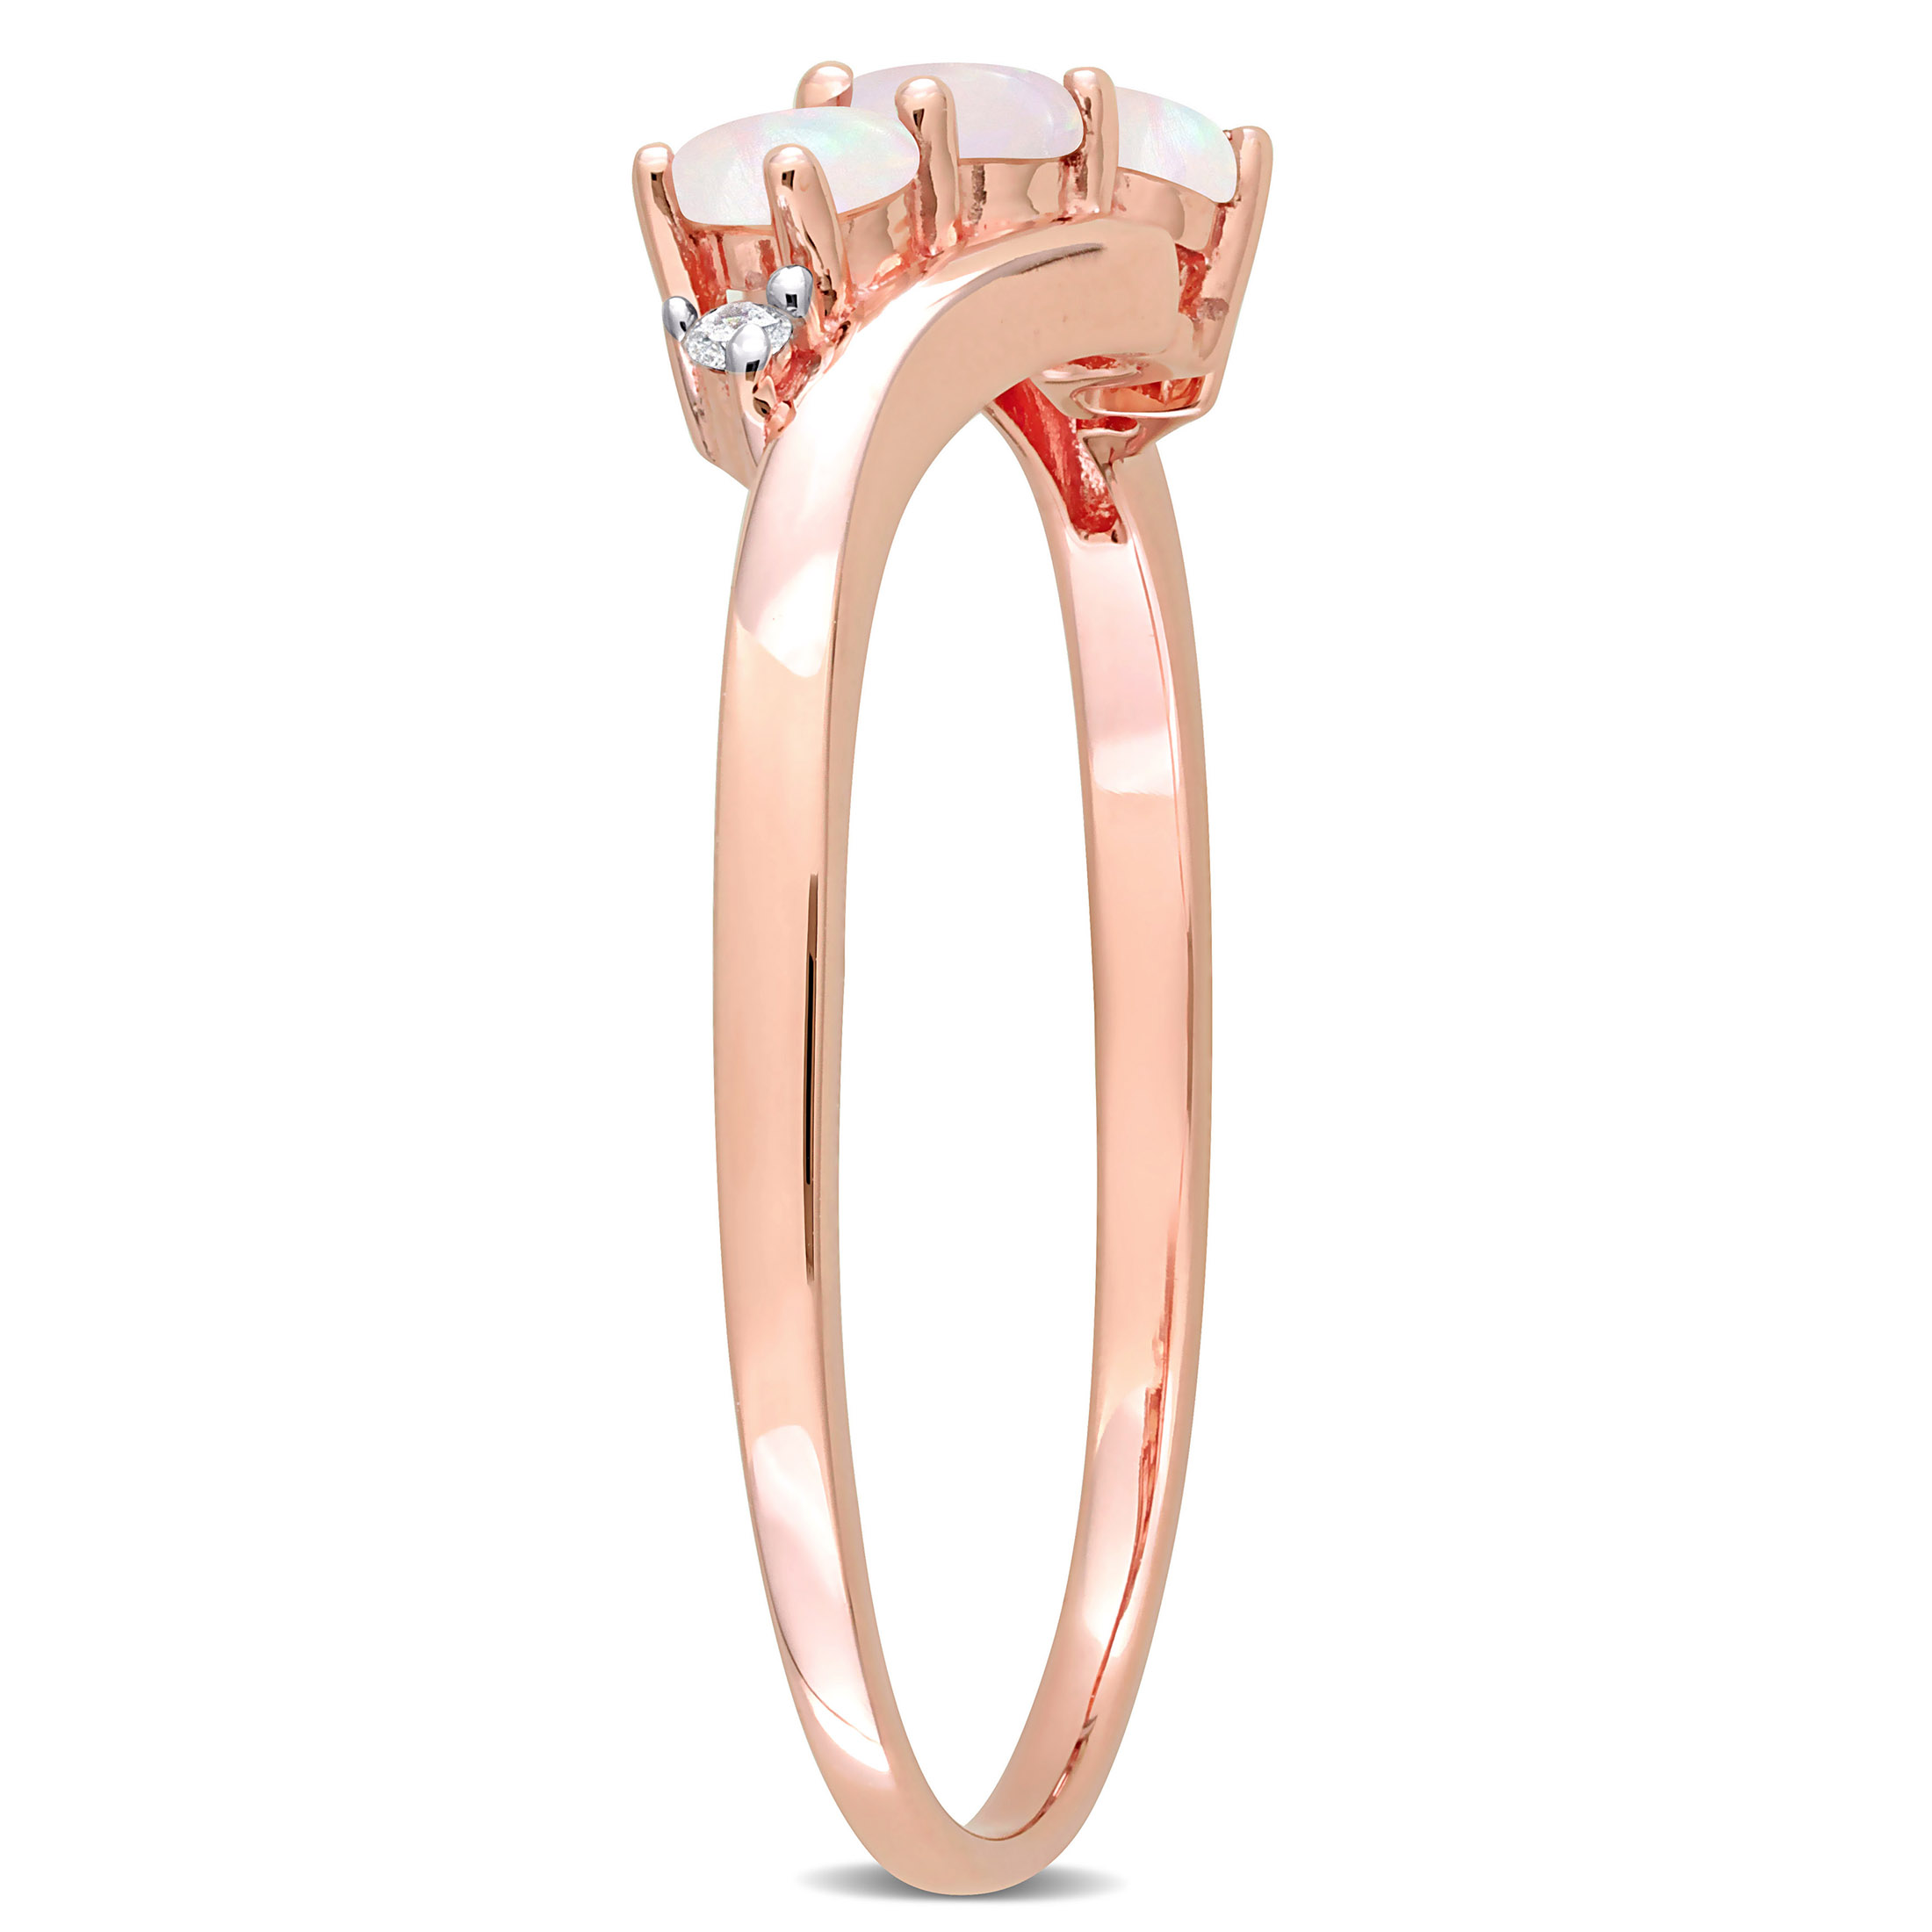 1/5 CT TGW Opal and Diamond Accent 3-Stone Ring in 10k Rose Gold